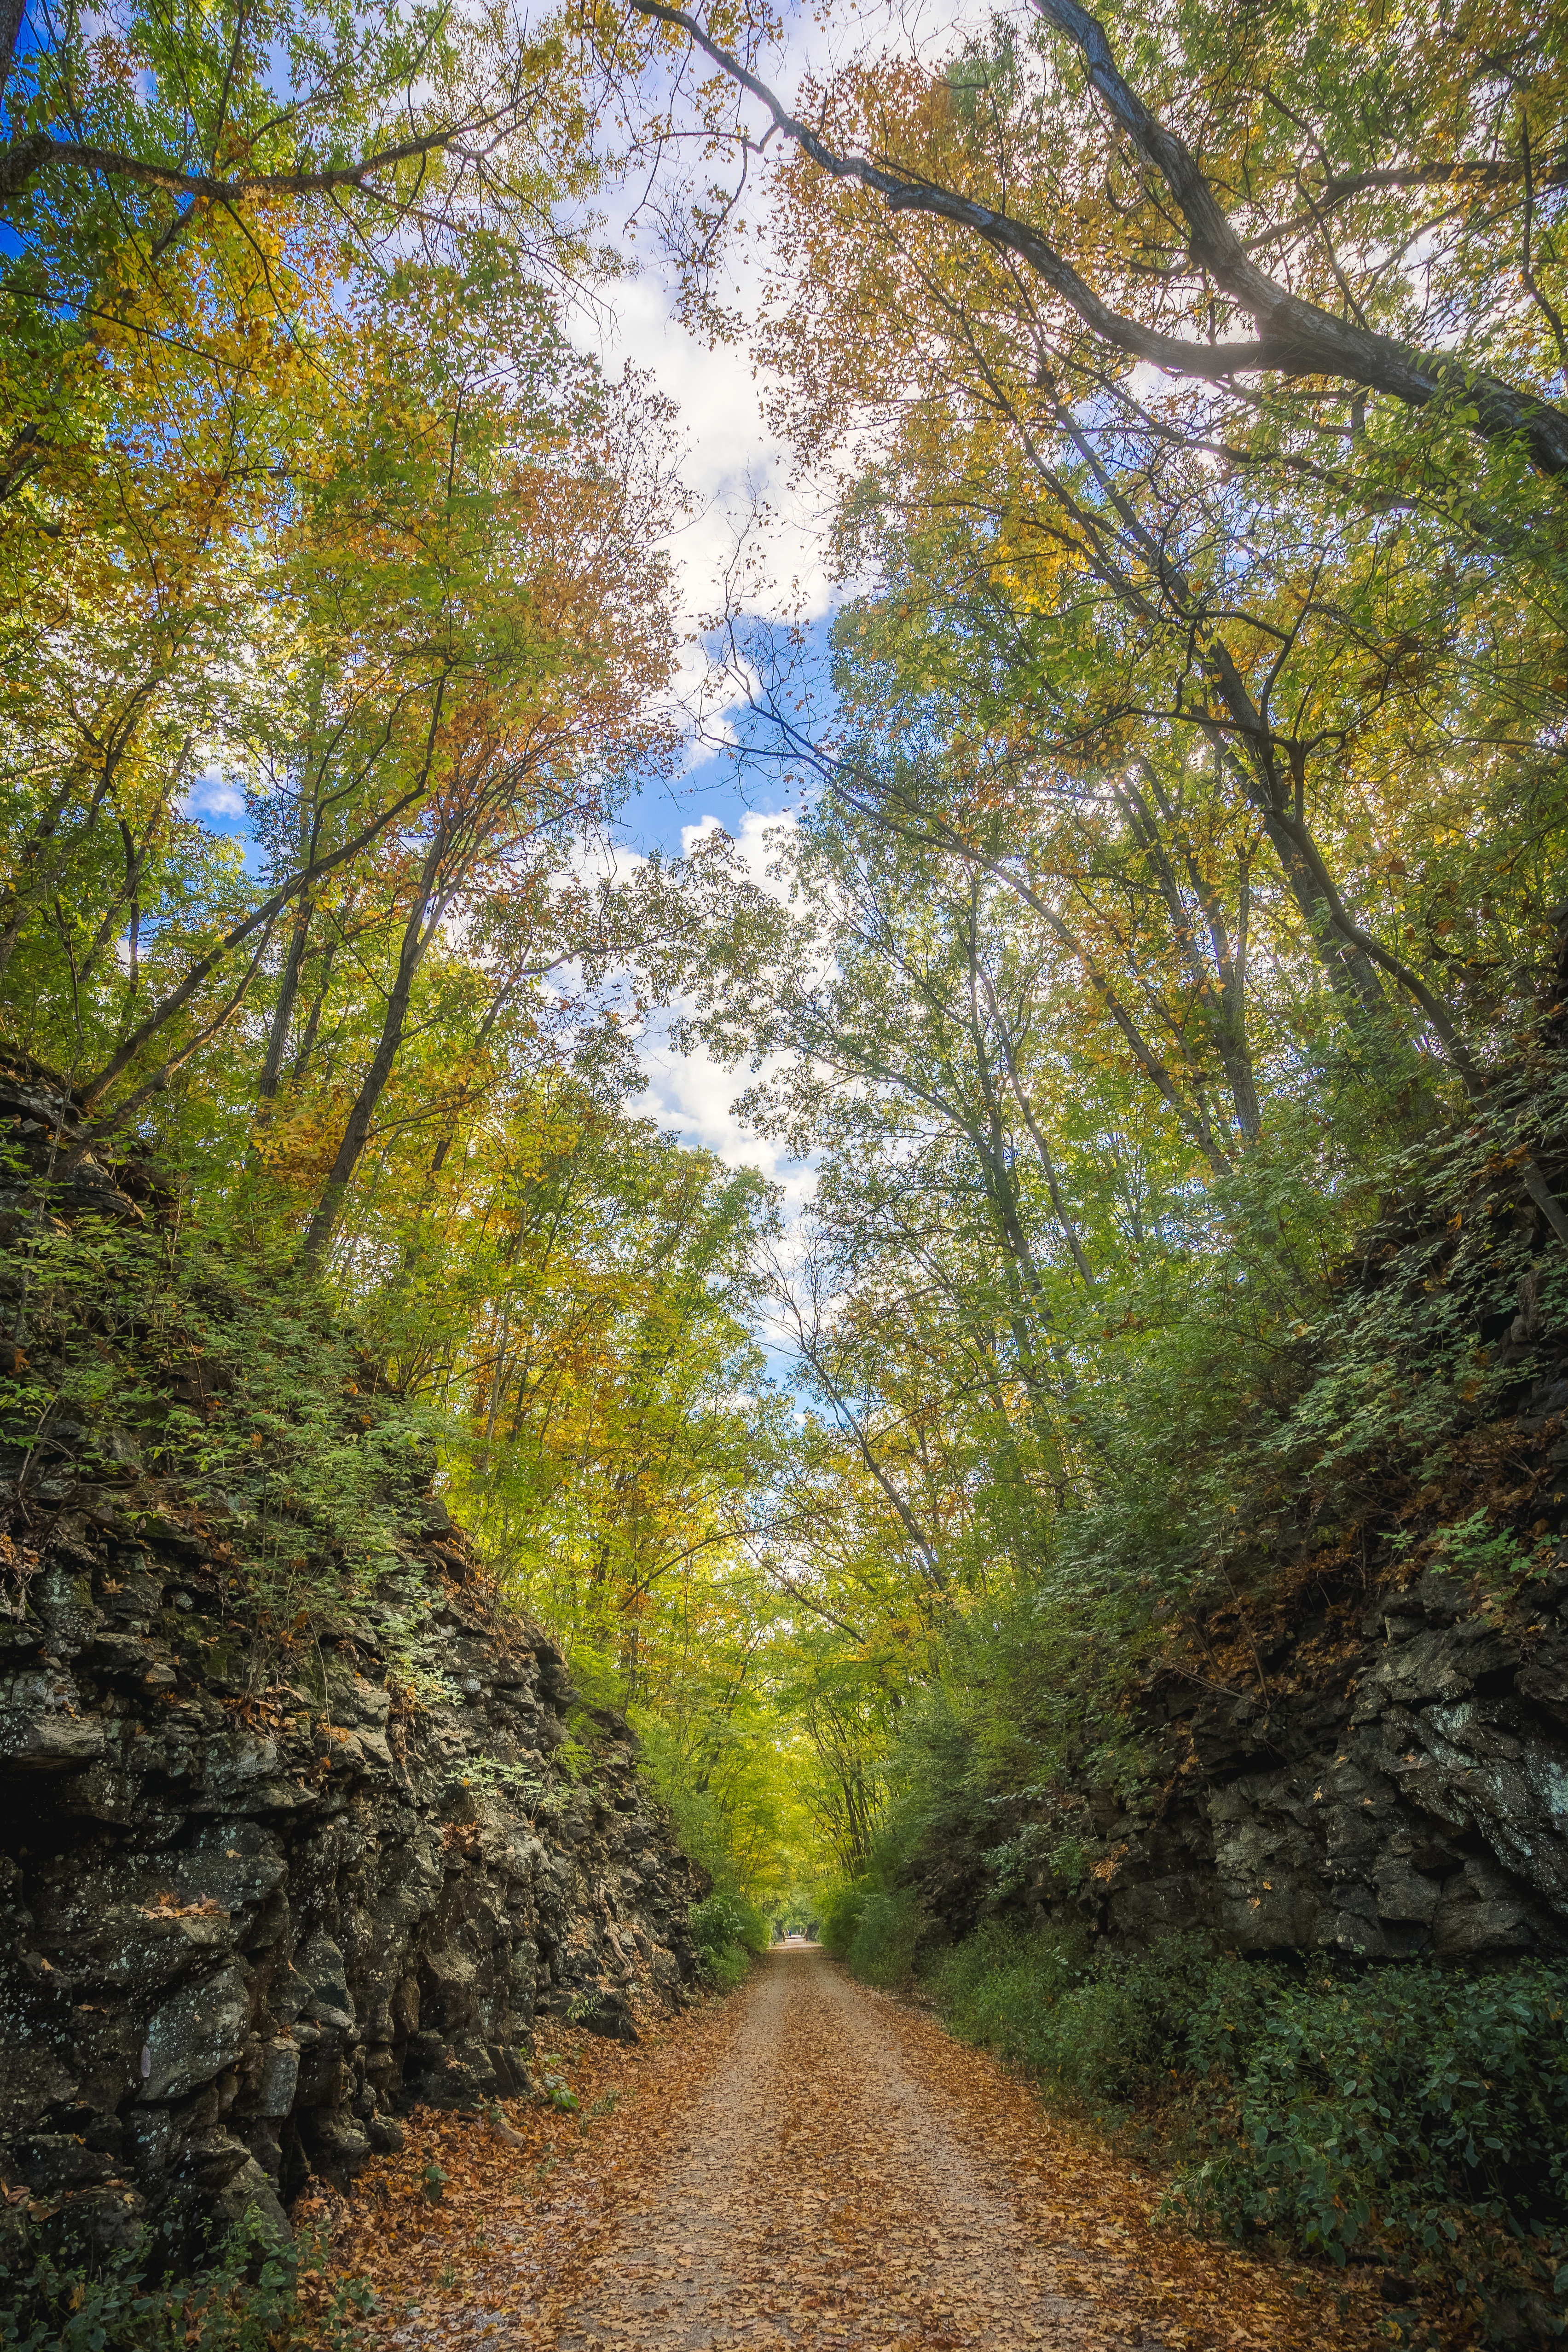 android rock, nature, road, alley, stone, foliage